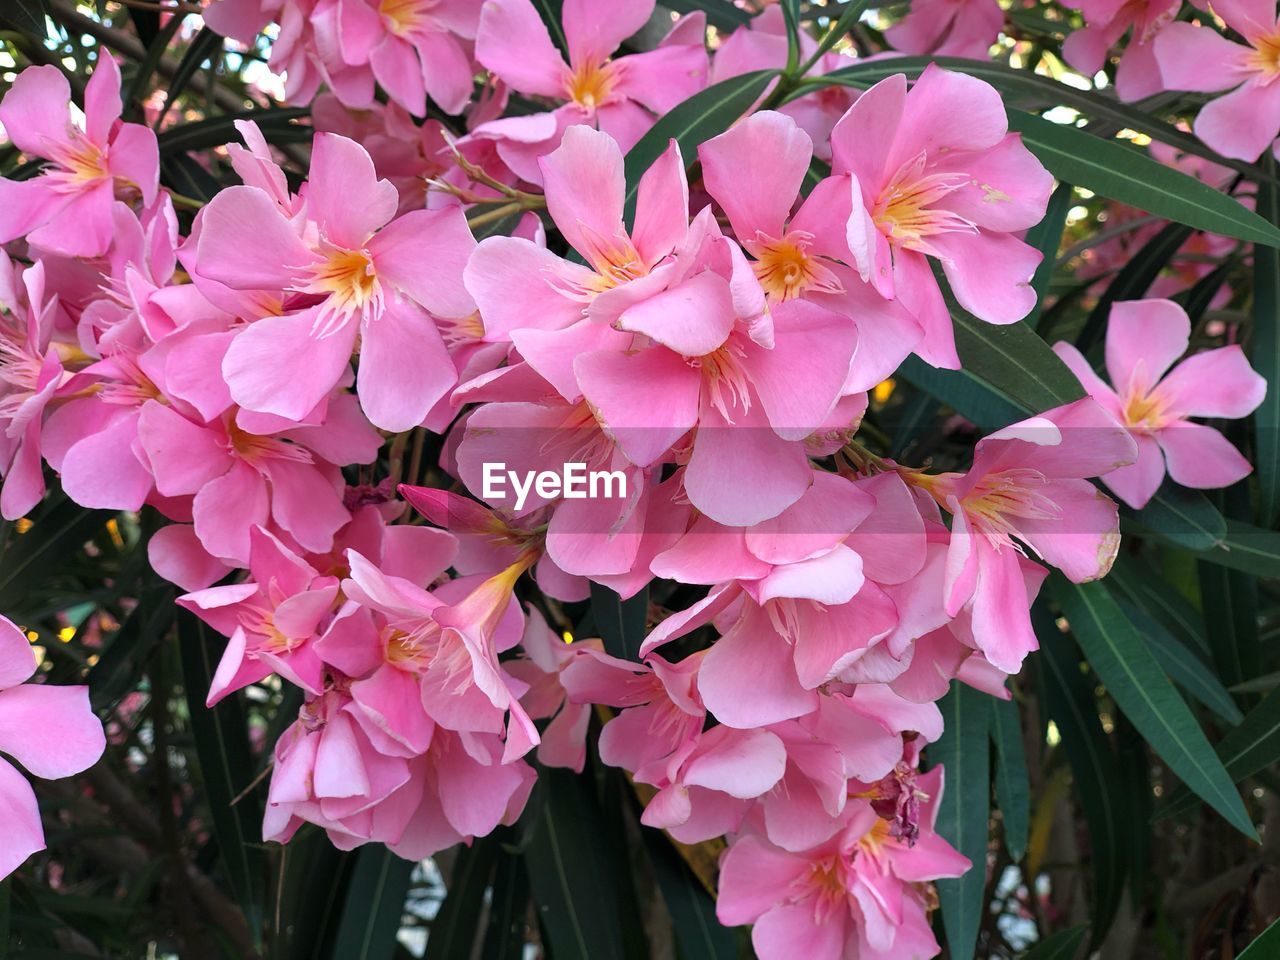 CLOSE-UP OF PINK FLOWERS ON PLANT